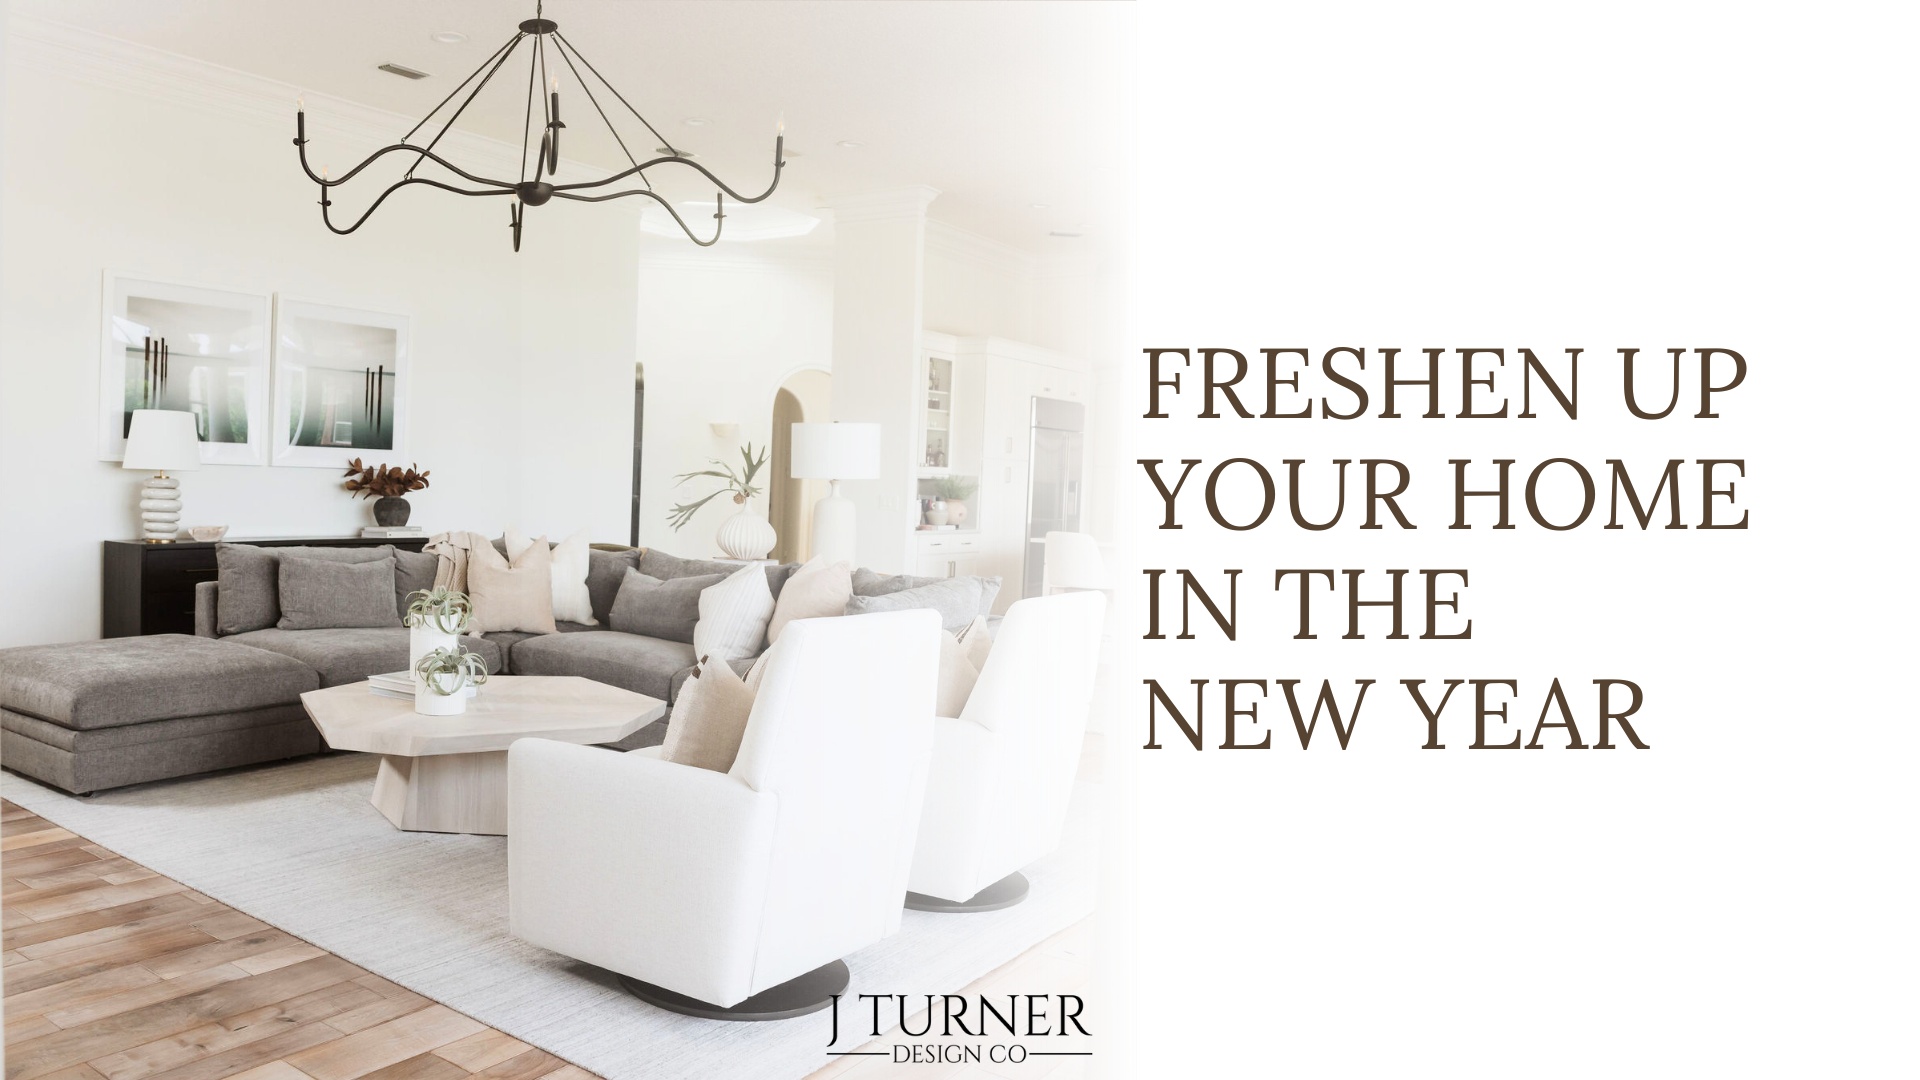 Freshen Up Your Home In the New Year